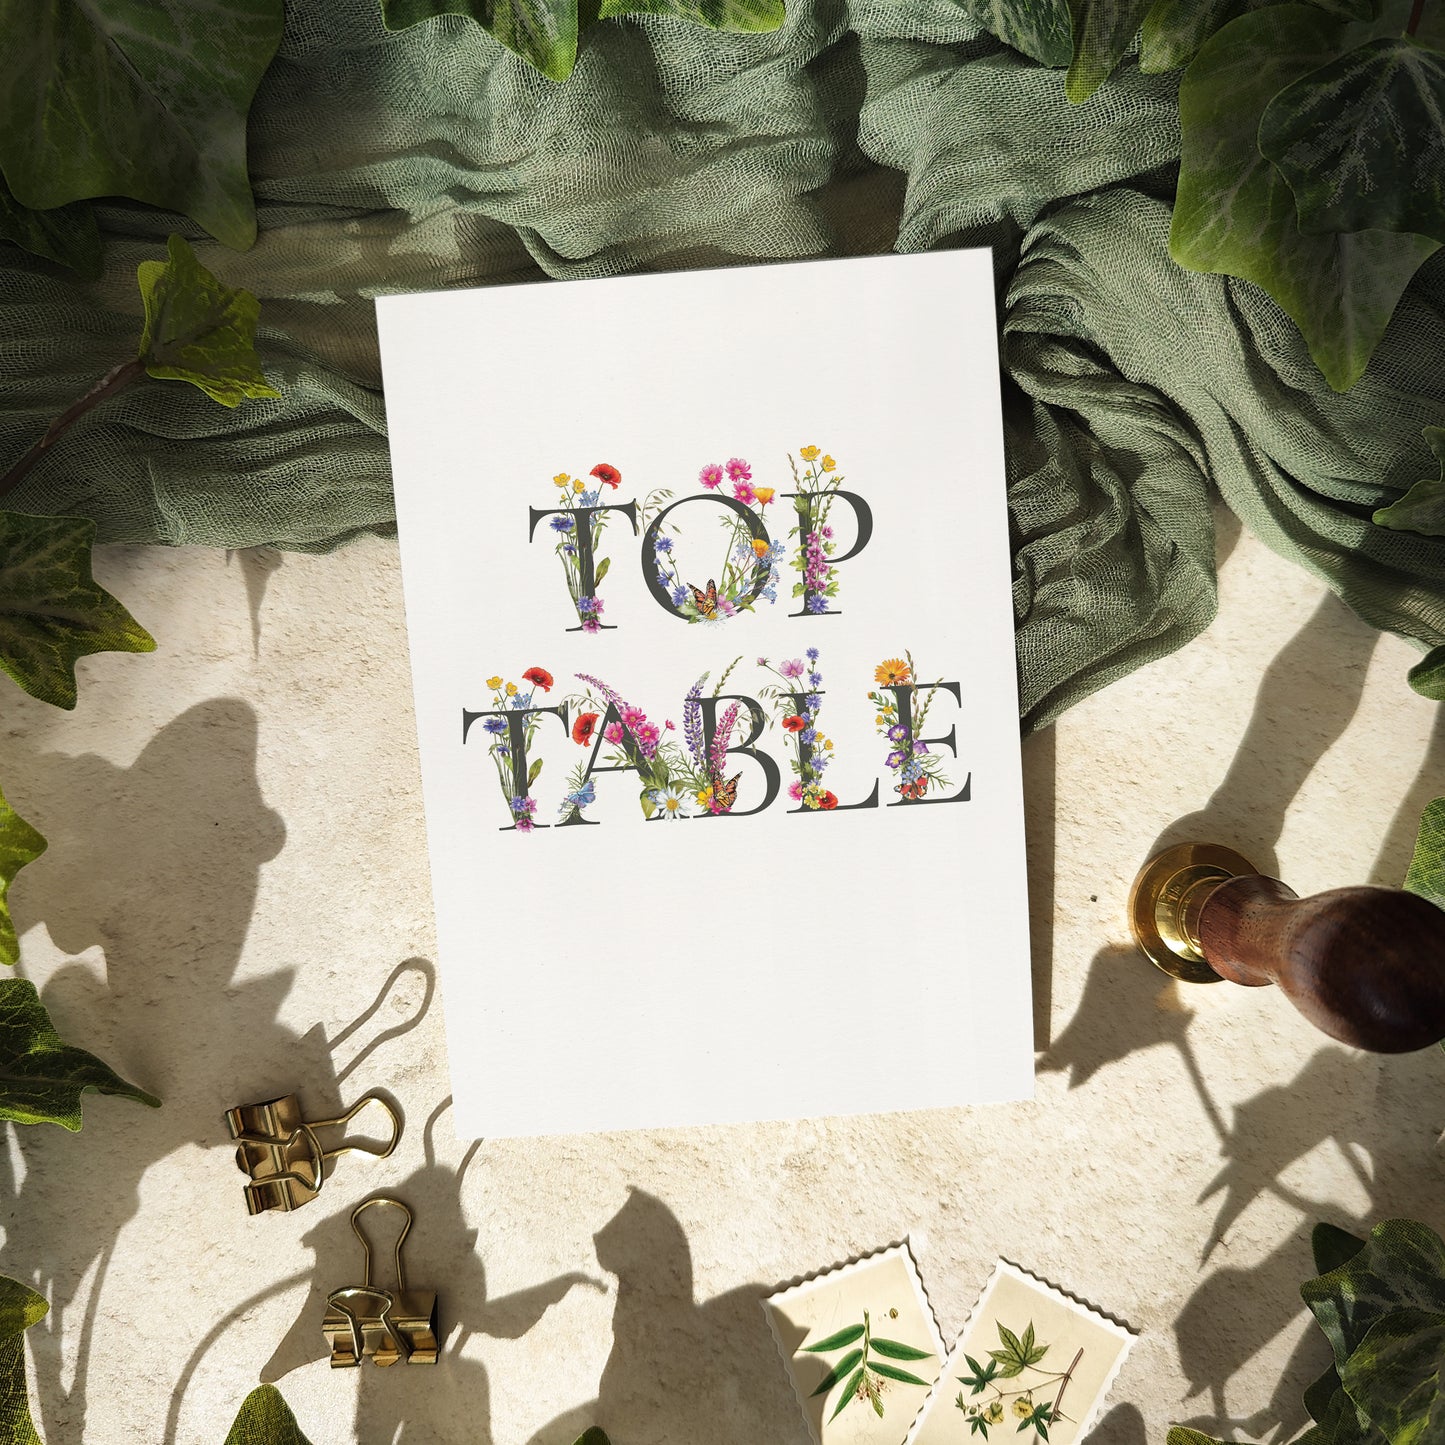 Wildflower Meadow Table Number Cards